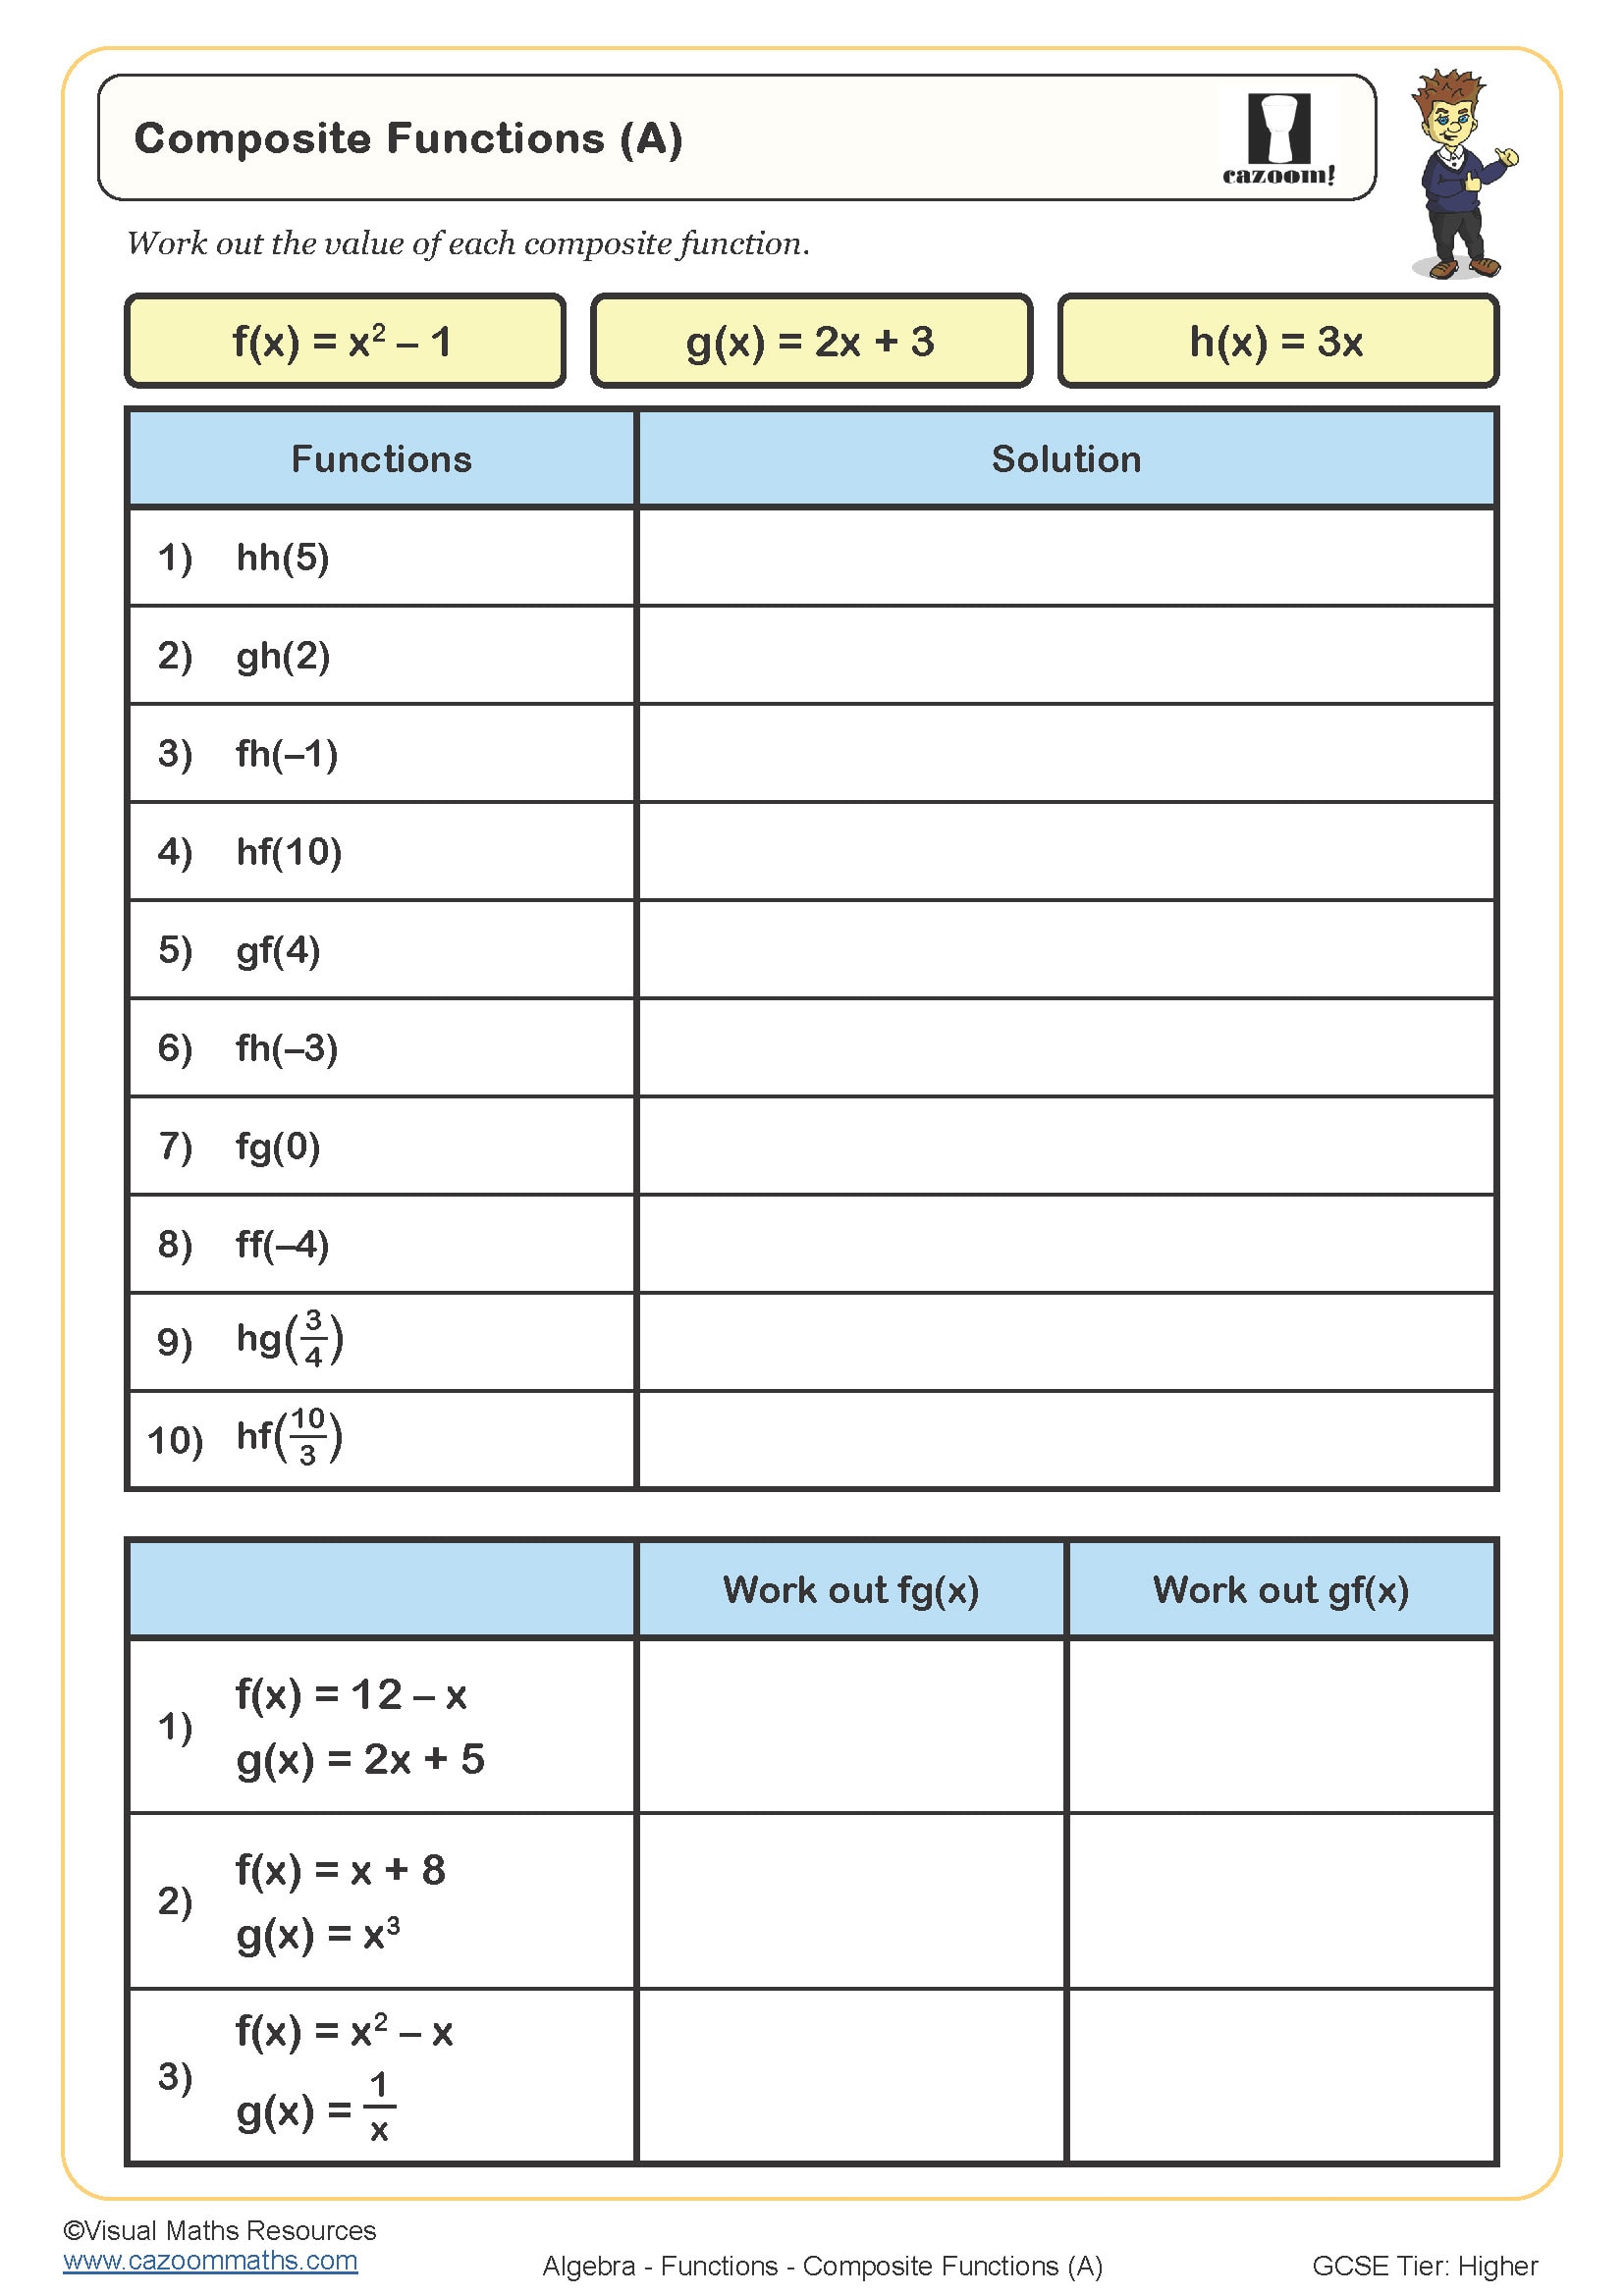 Composite Functions Worksheet fit for students in year 10 and year 11